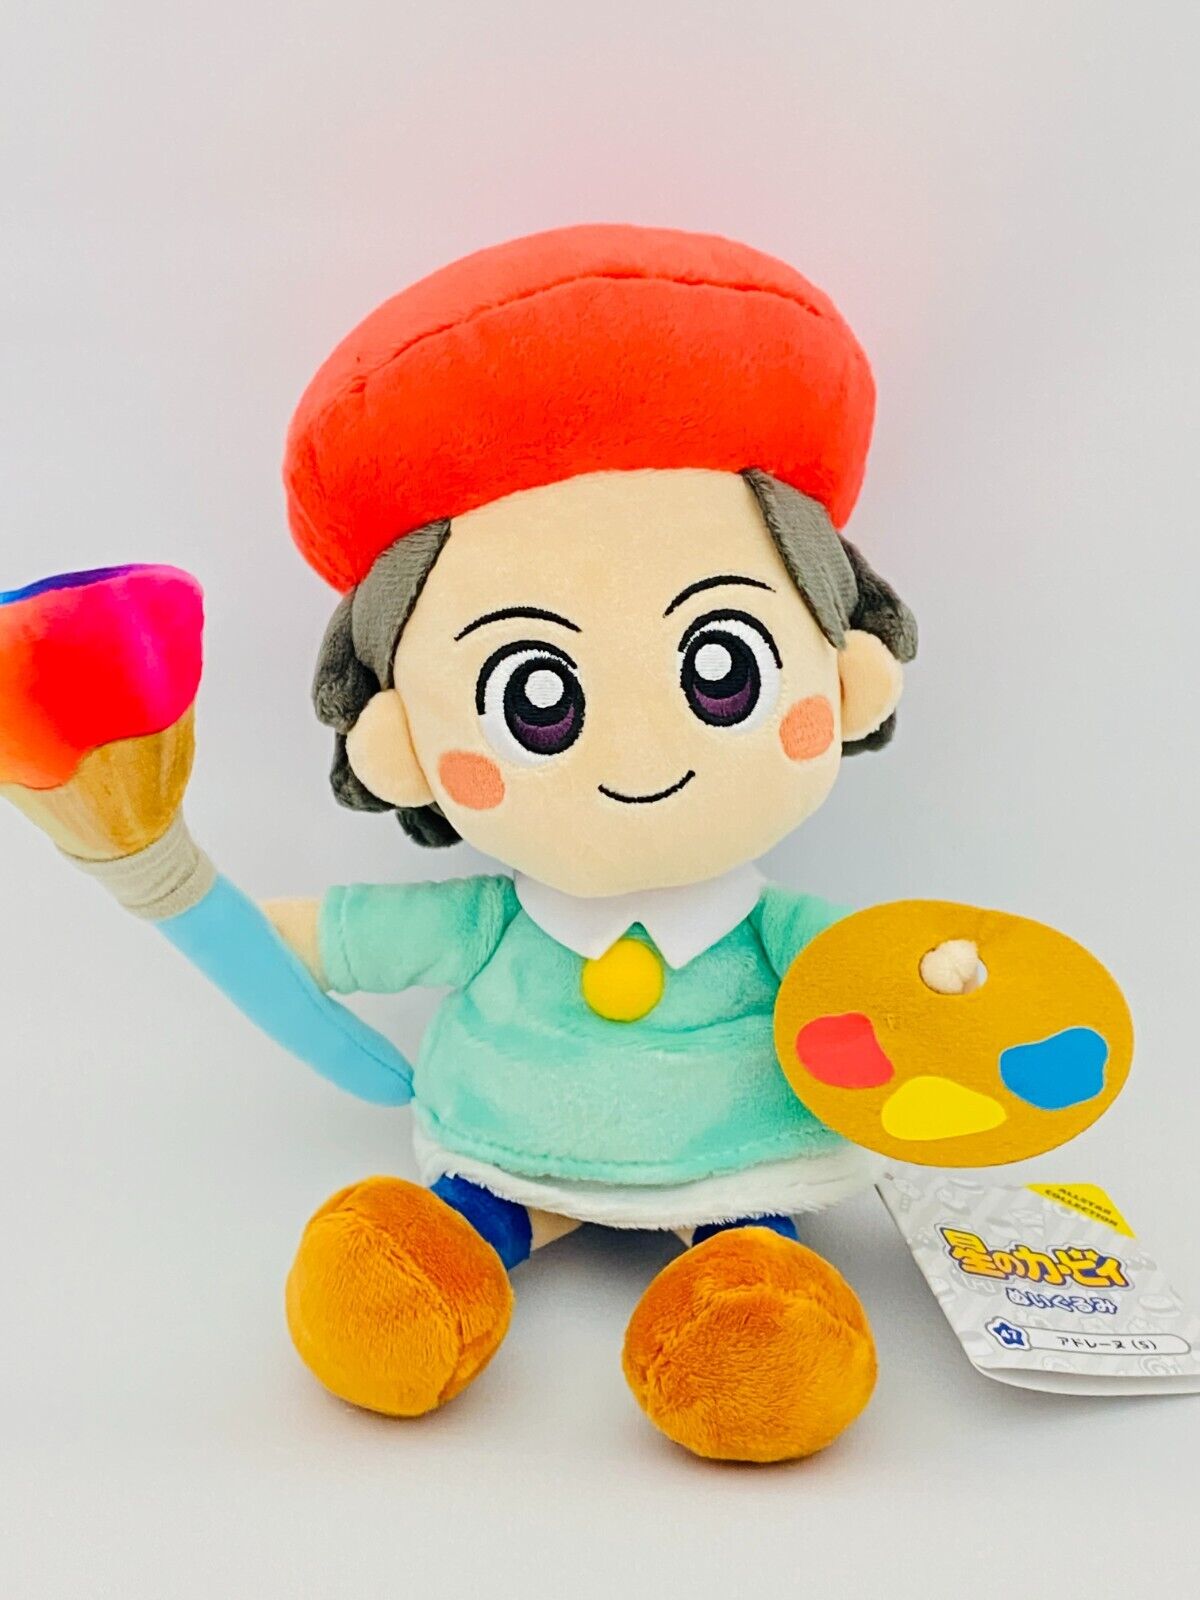 Kirby Super Star Plush Doll ALL STAR COLLECTION Adeleine S Size Stuffed toy New